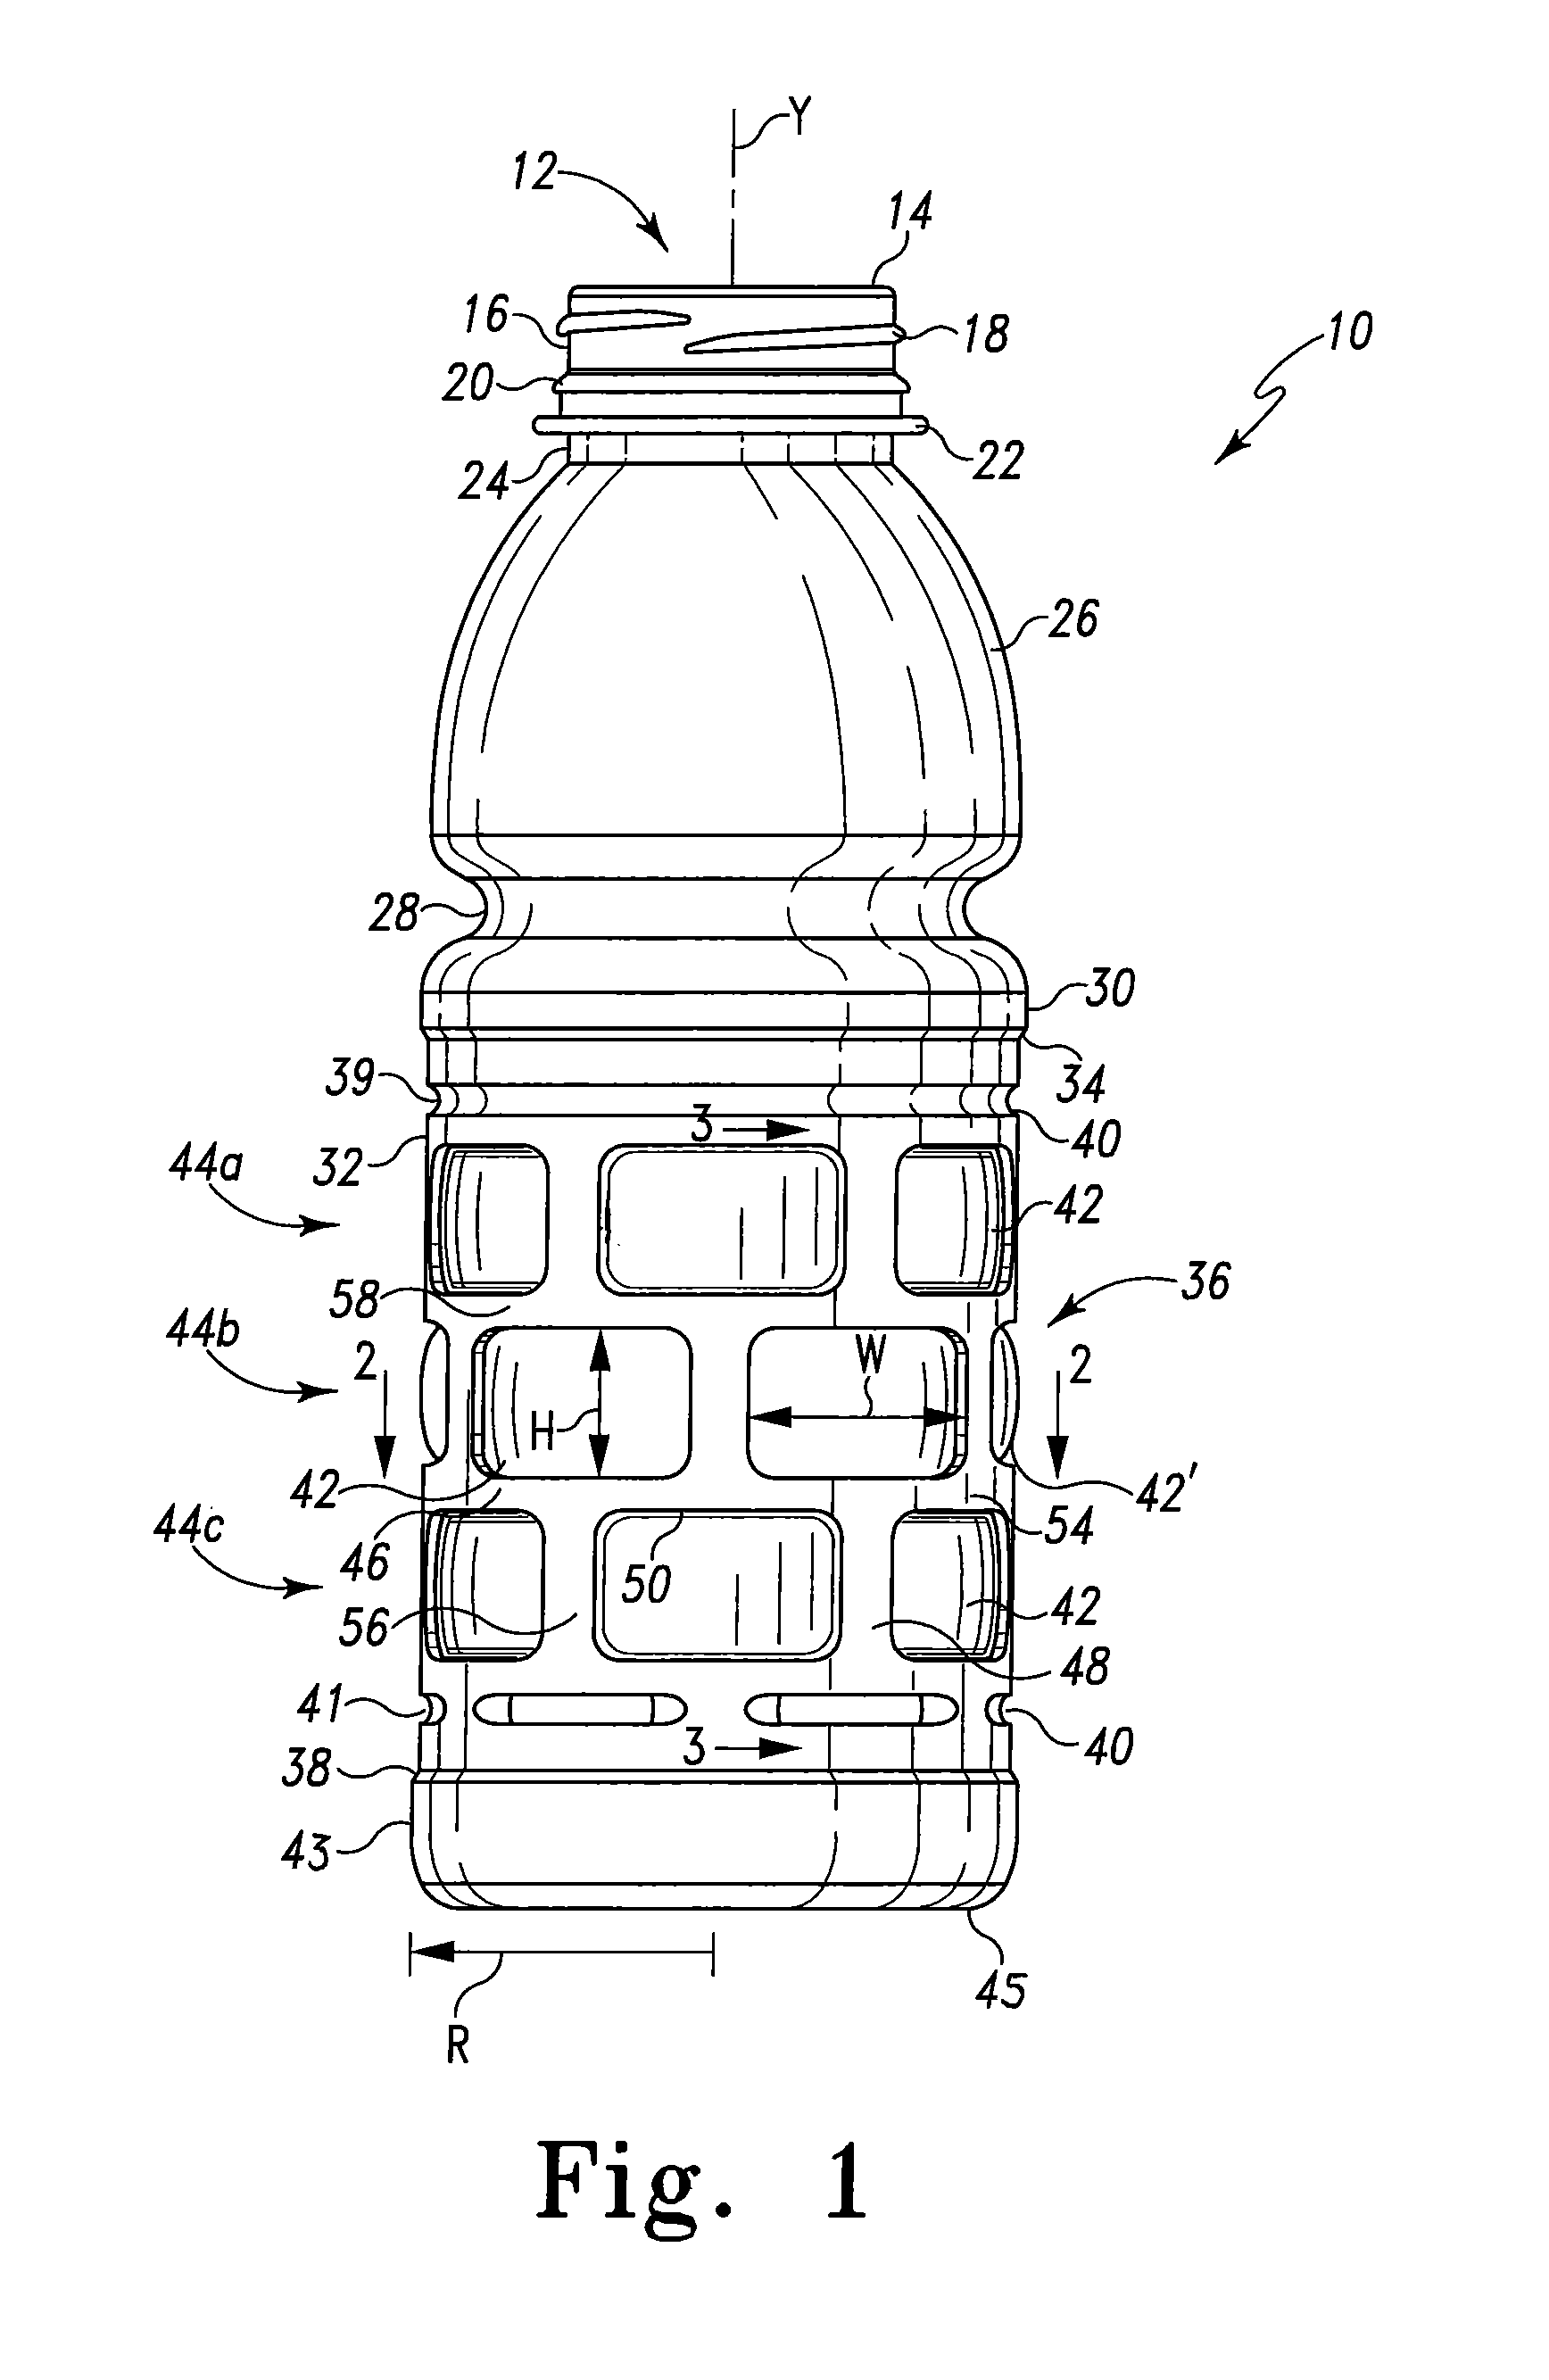 Plastic container with horizontally oriented panels